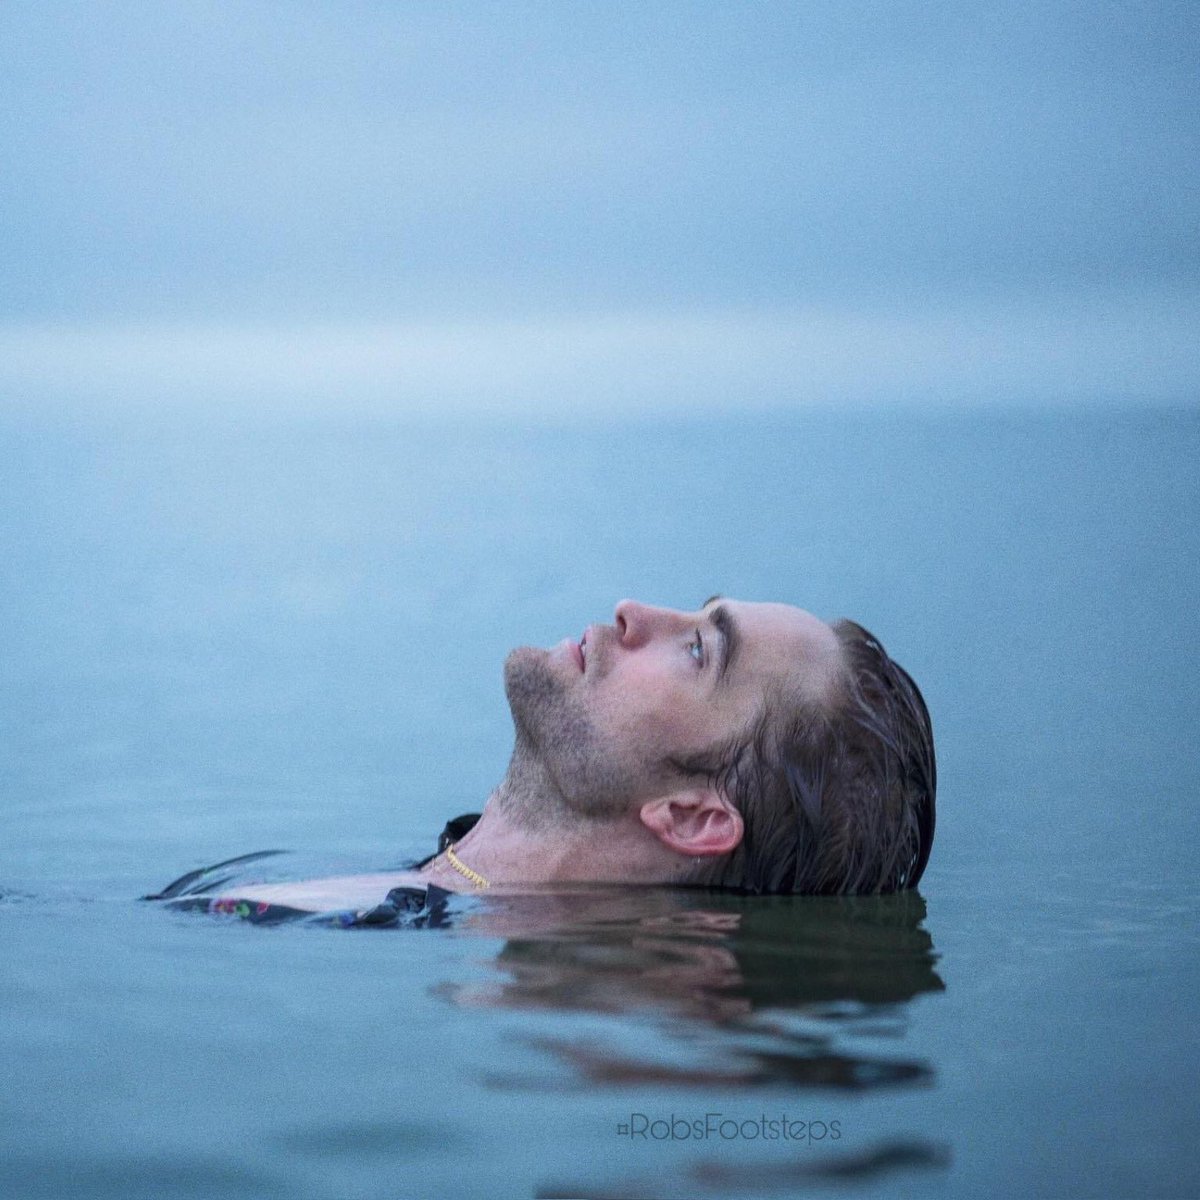 Robert Pattinson: “I’ll literally do a movie specifically because I think I can’t do it. You just hope you don’t drown. And then when you don’t drown, you hopefully figure out how to swim.” #quotes